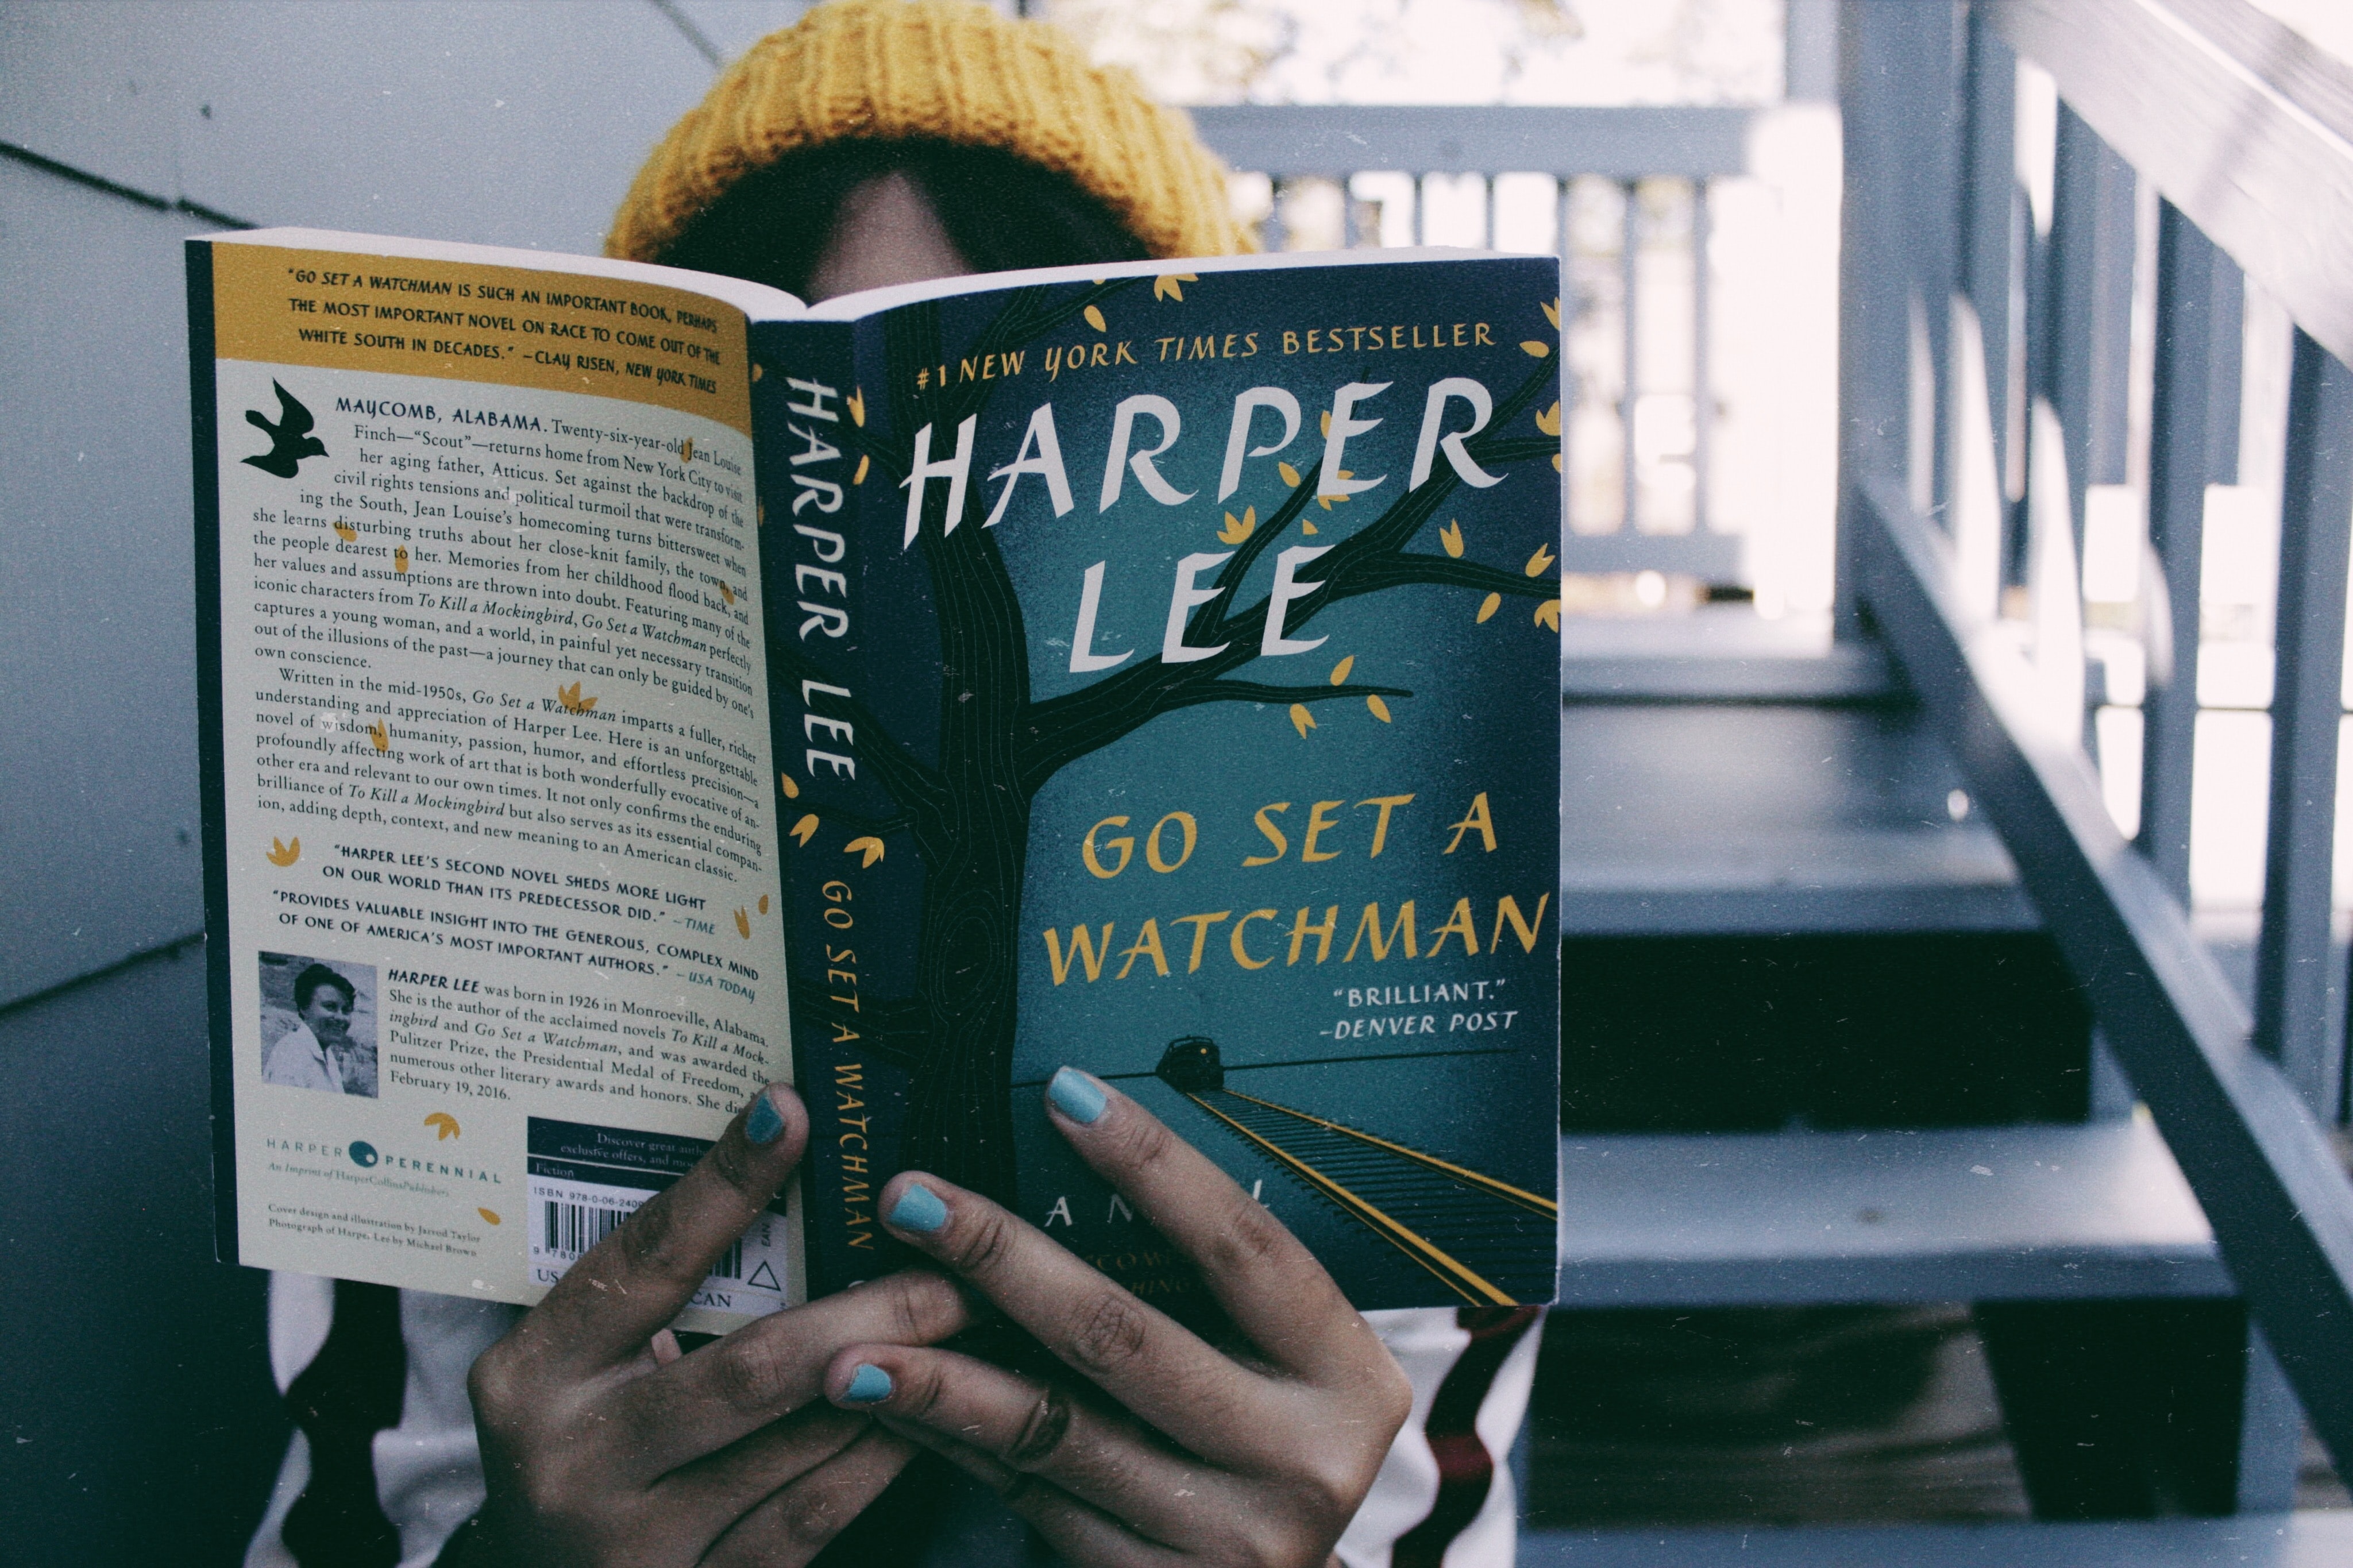 A girl in a yellow hat holds a copy of go set a watchman by harper lee - it is covering her face